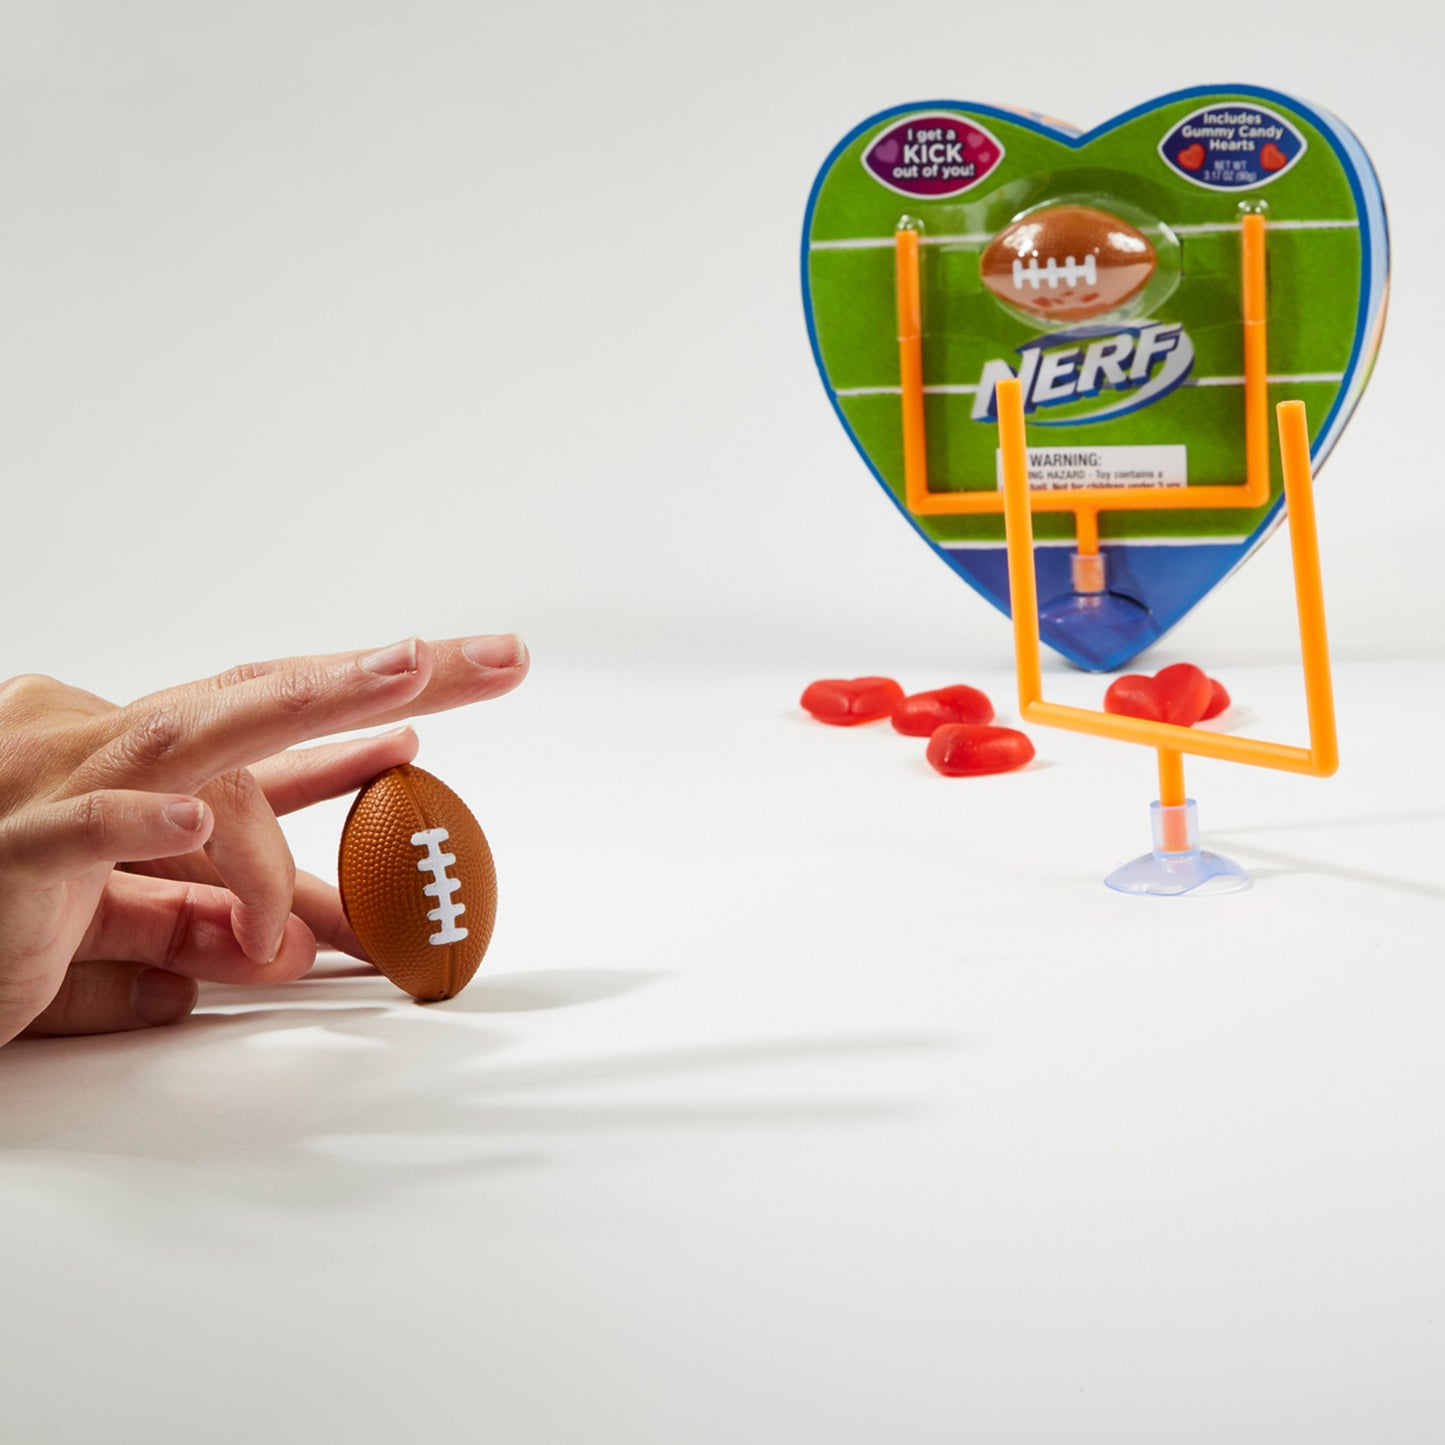 heart shaped box with red heart shaped gummies and hand playing with toy brown football and toy orange goal post